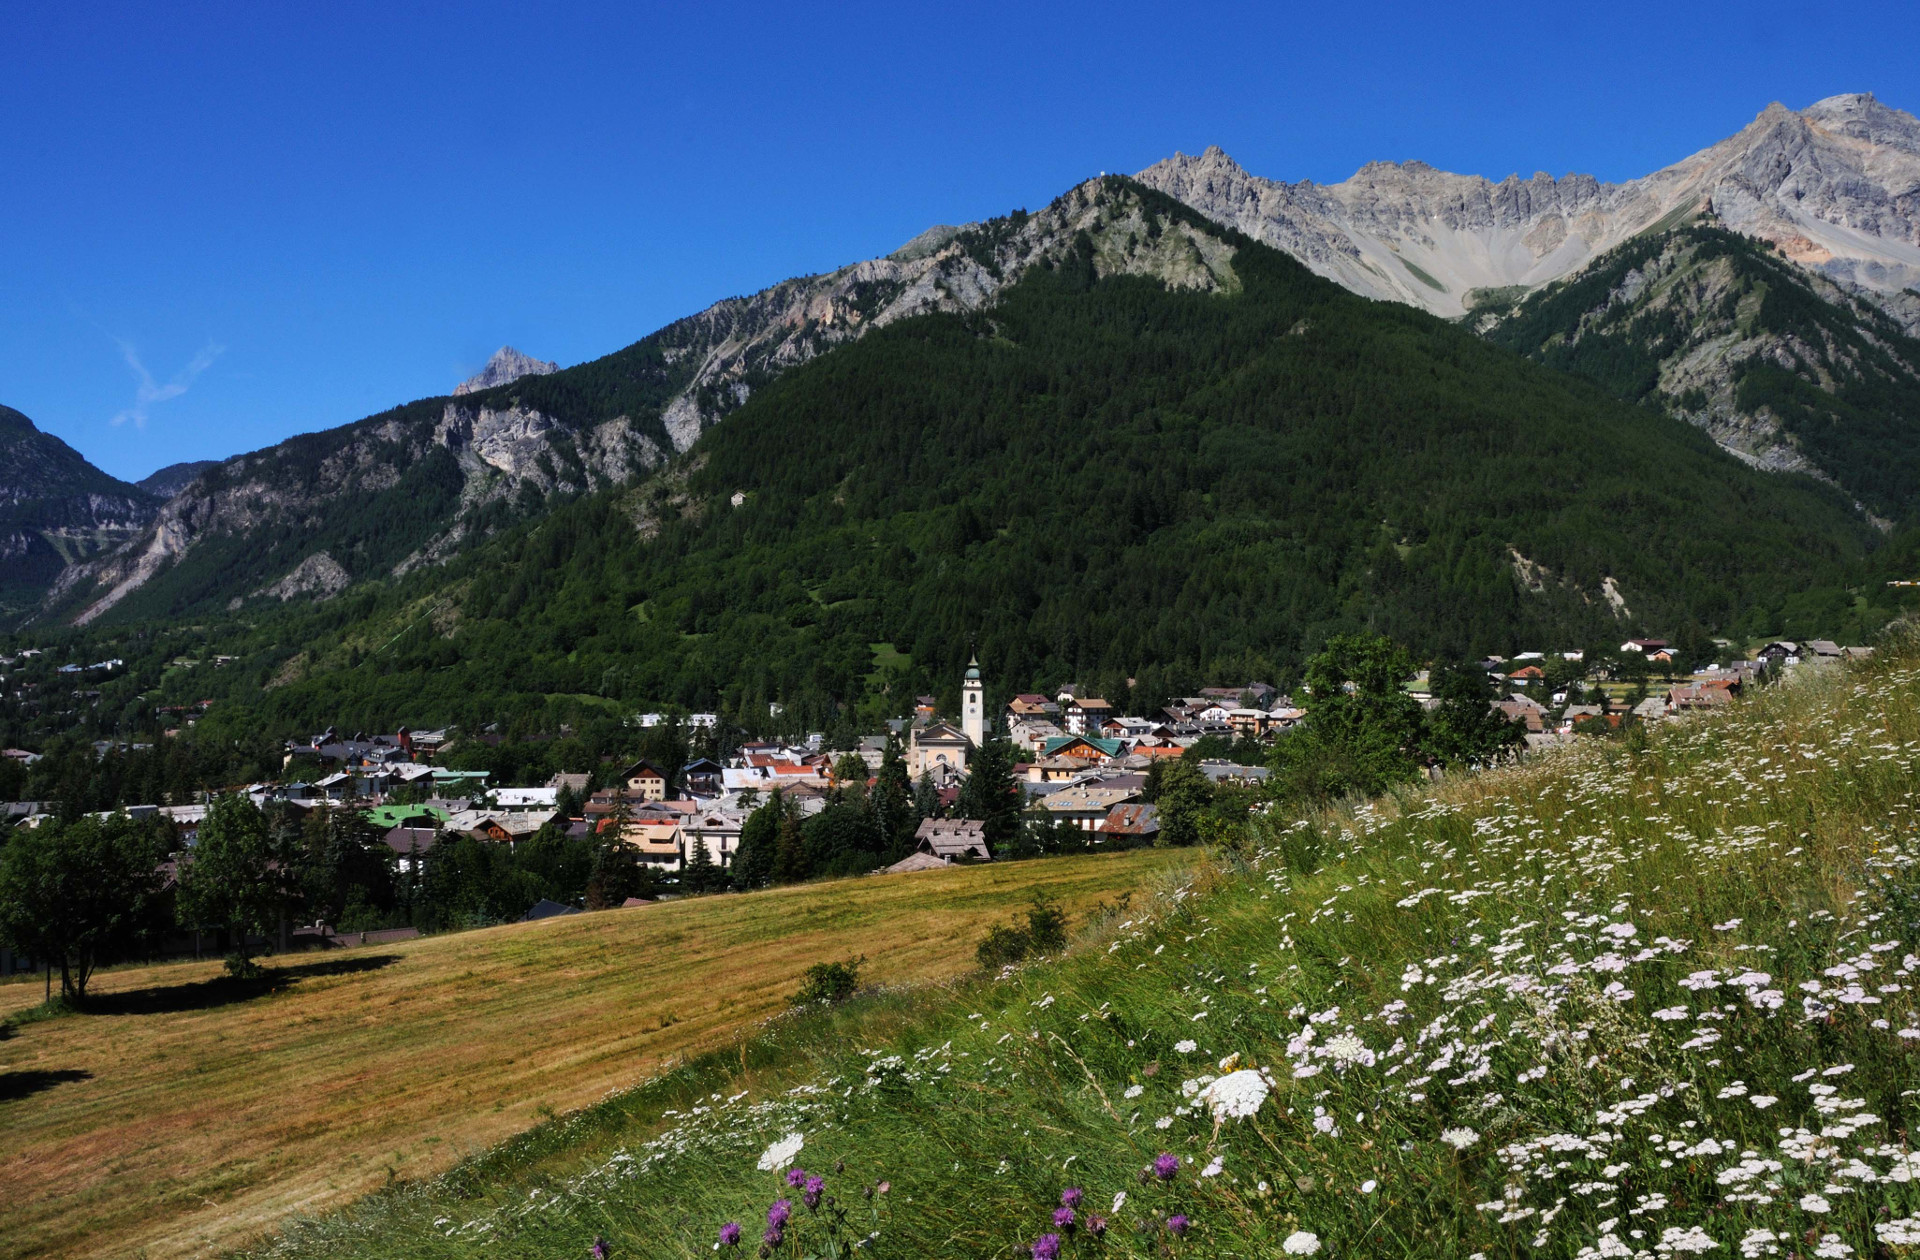 BOOK YOUR HOLIDAY IN BARDONECCHIA WITH THE DISCOUNT VOUCHER OF THE PIEDMONT REGION